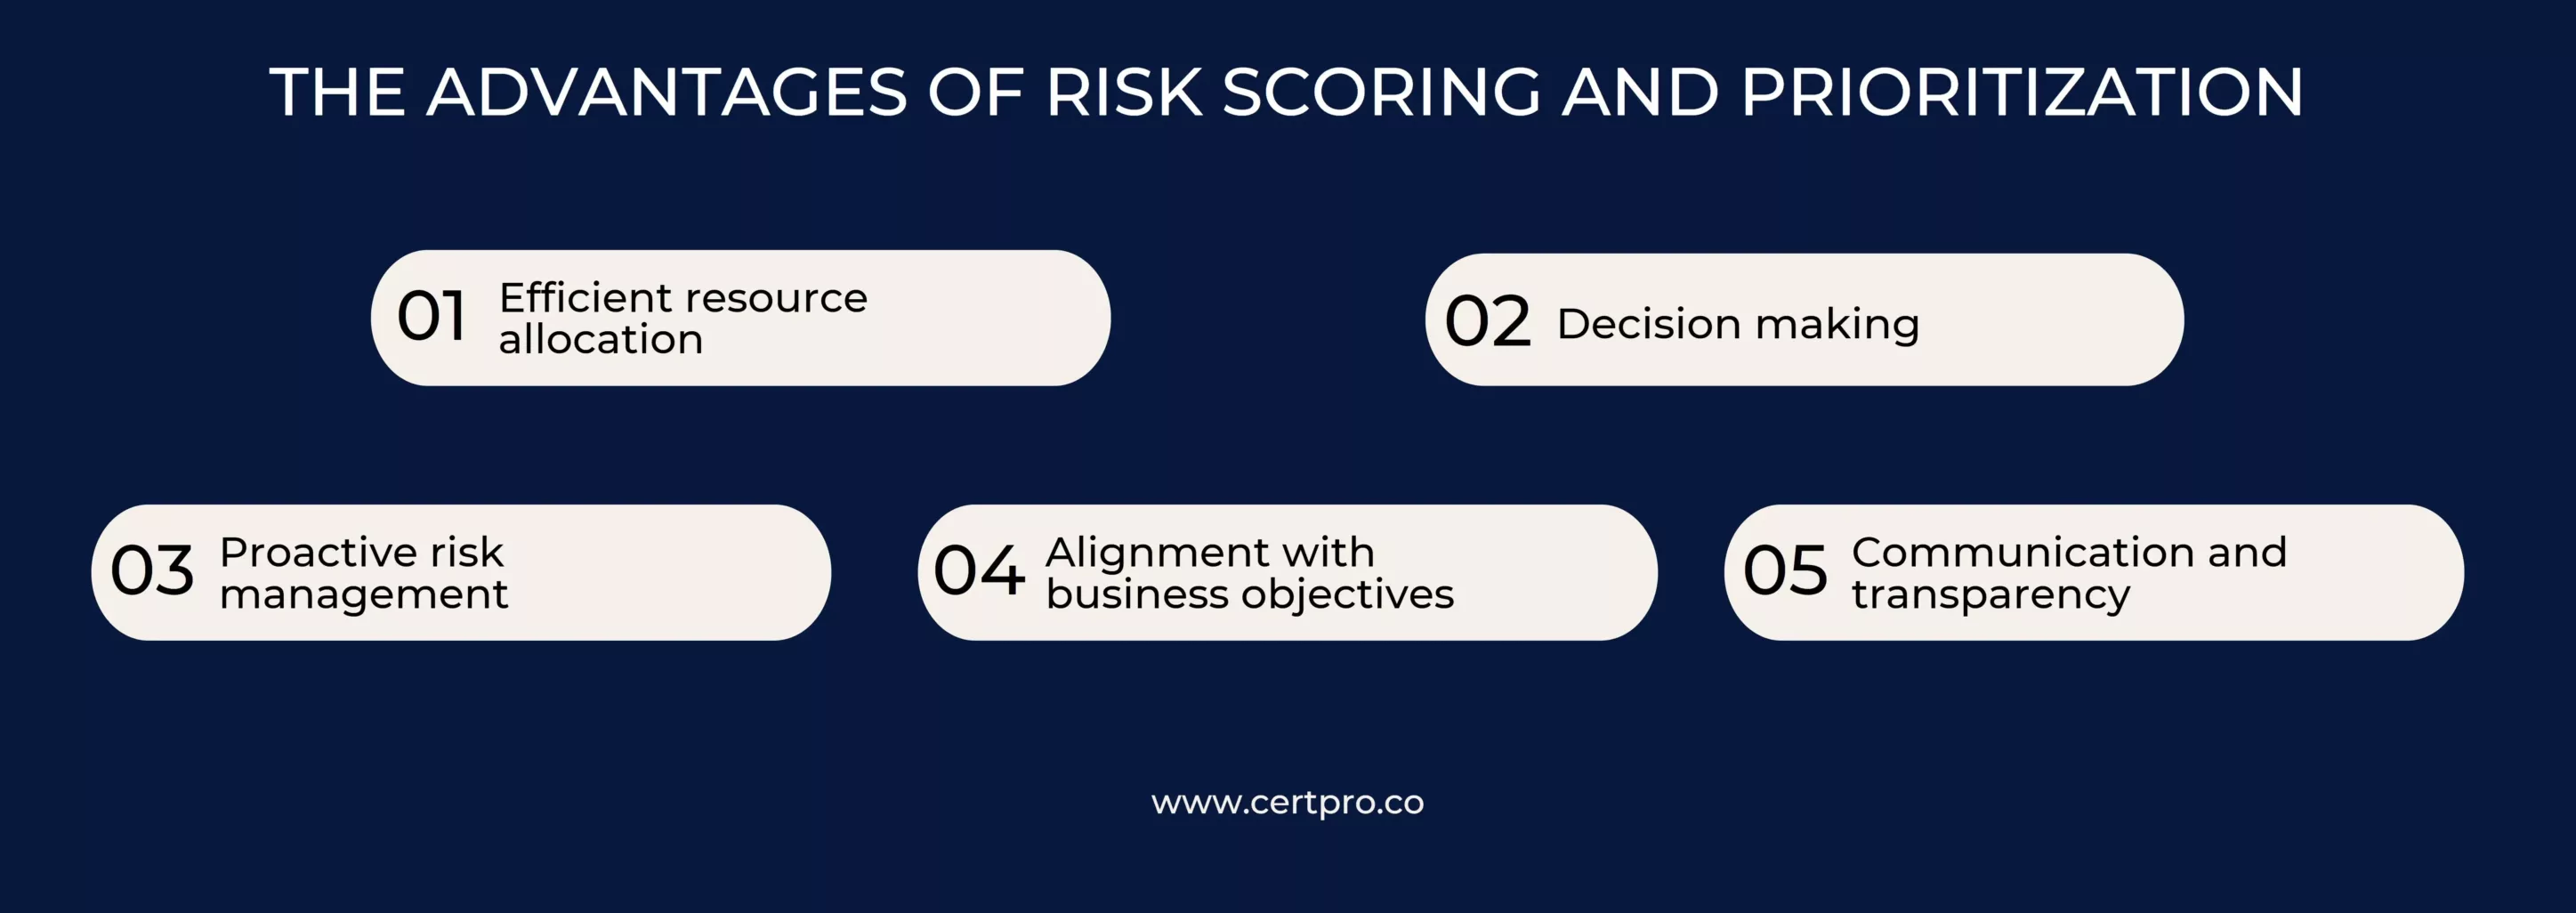 ADVANTAGES OF RISK SCORING AND PRIORITIZATION